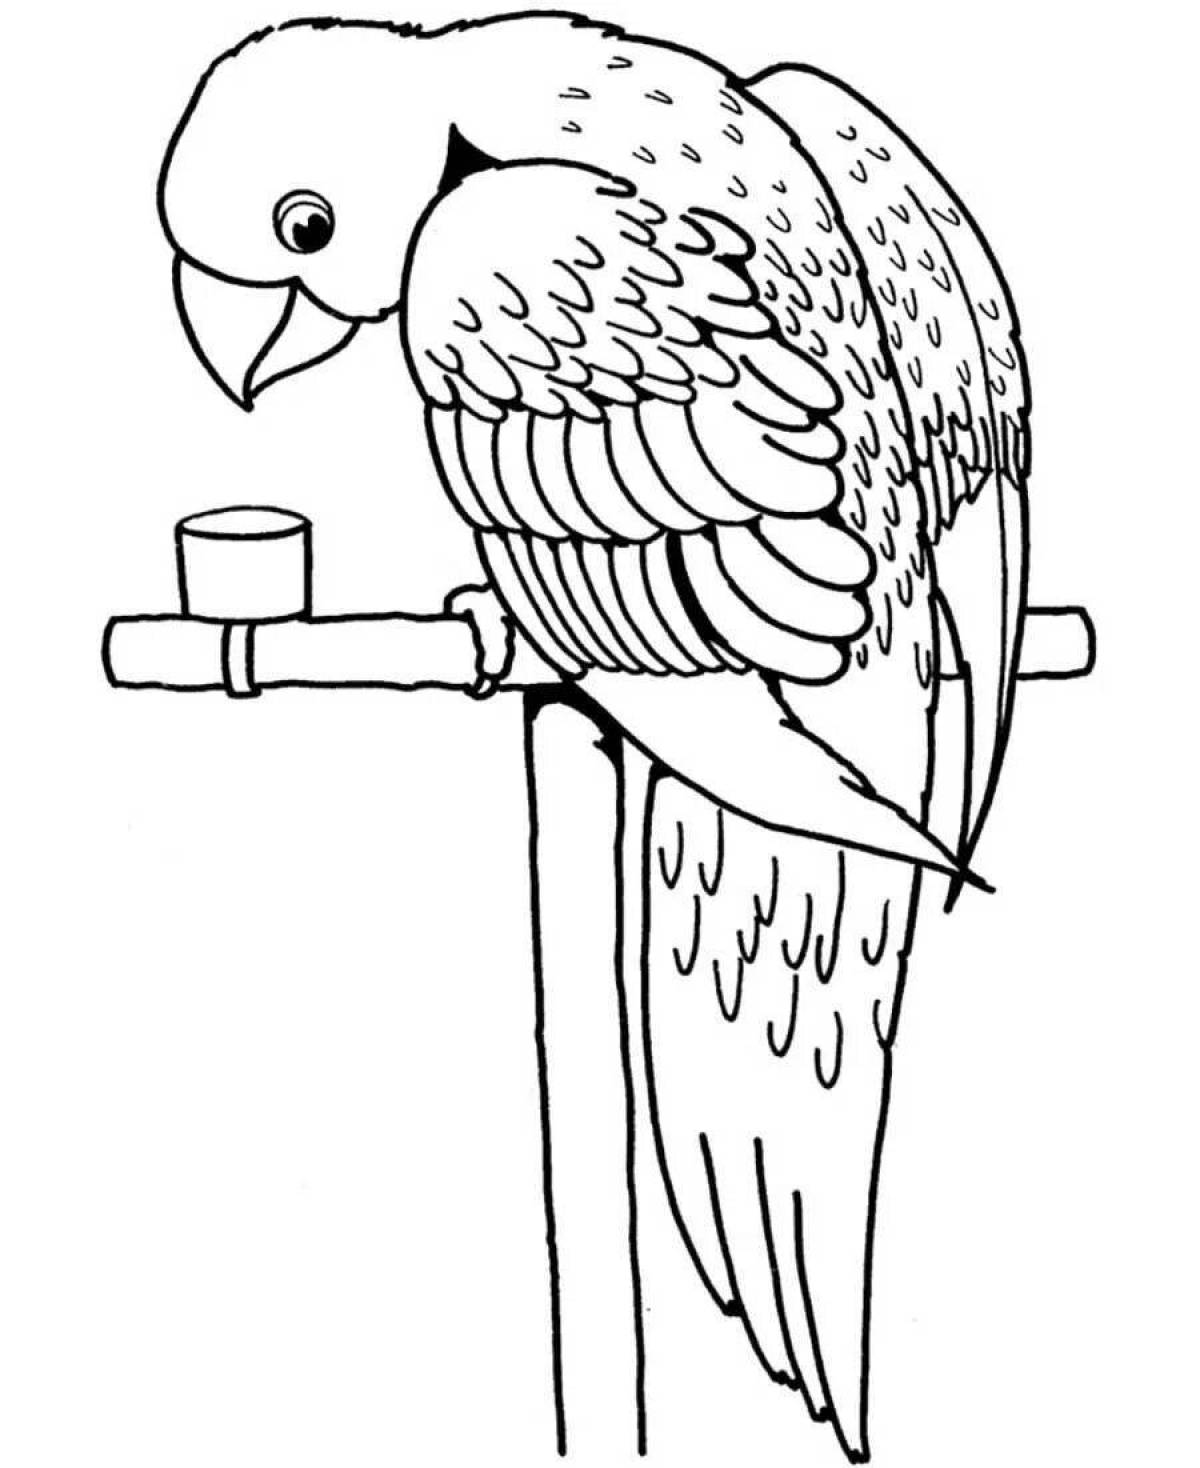 Awesome bird coloring pages for girls